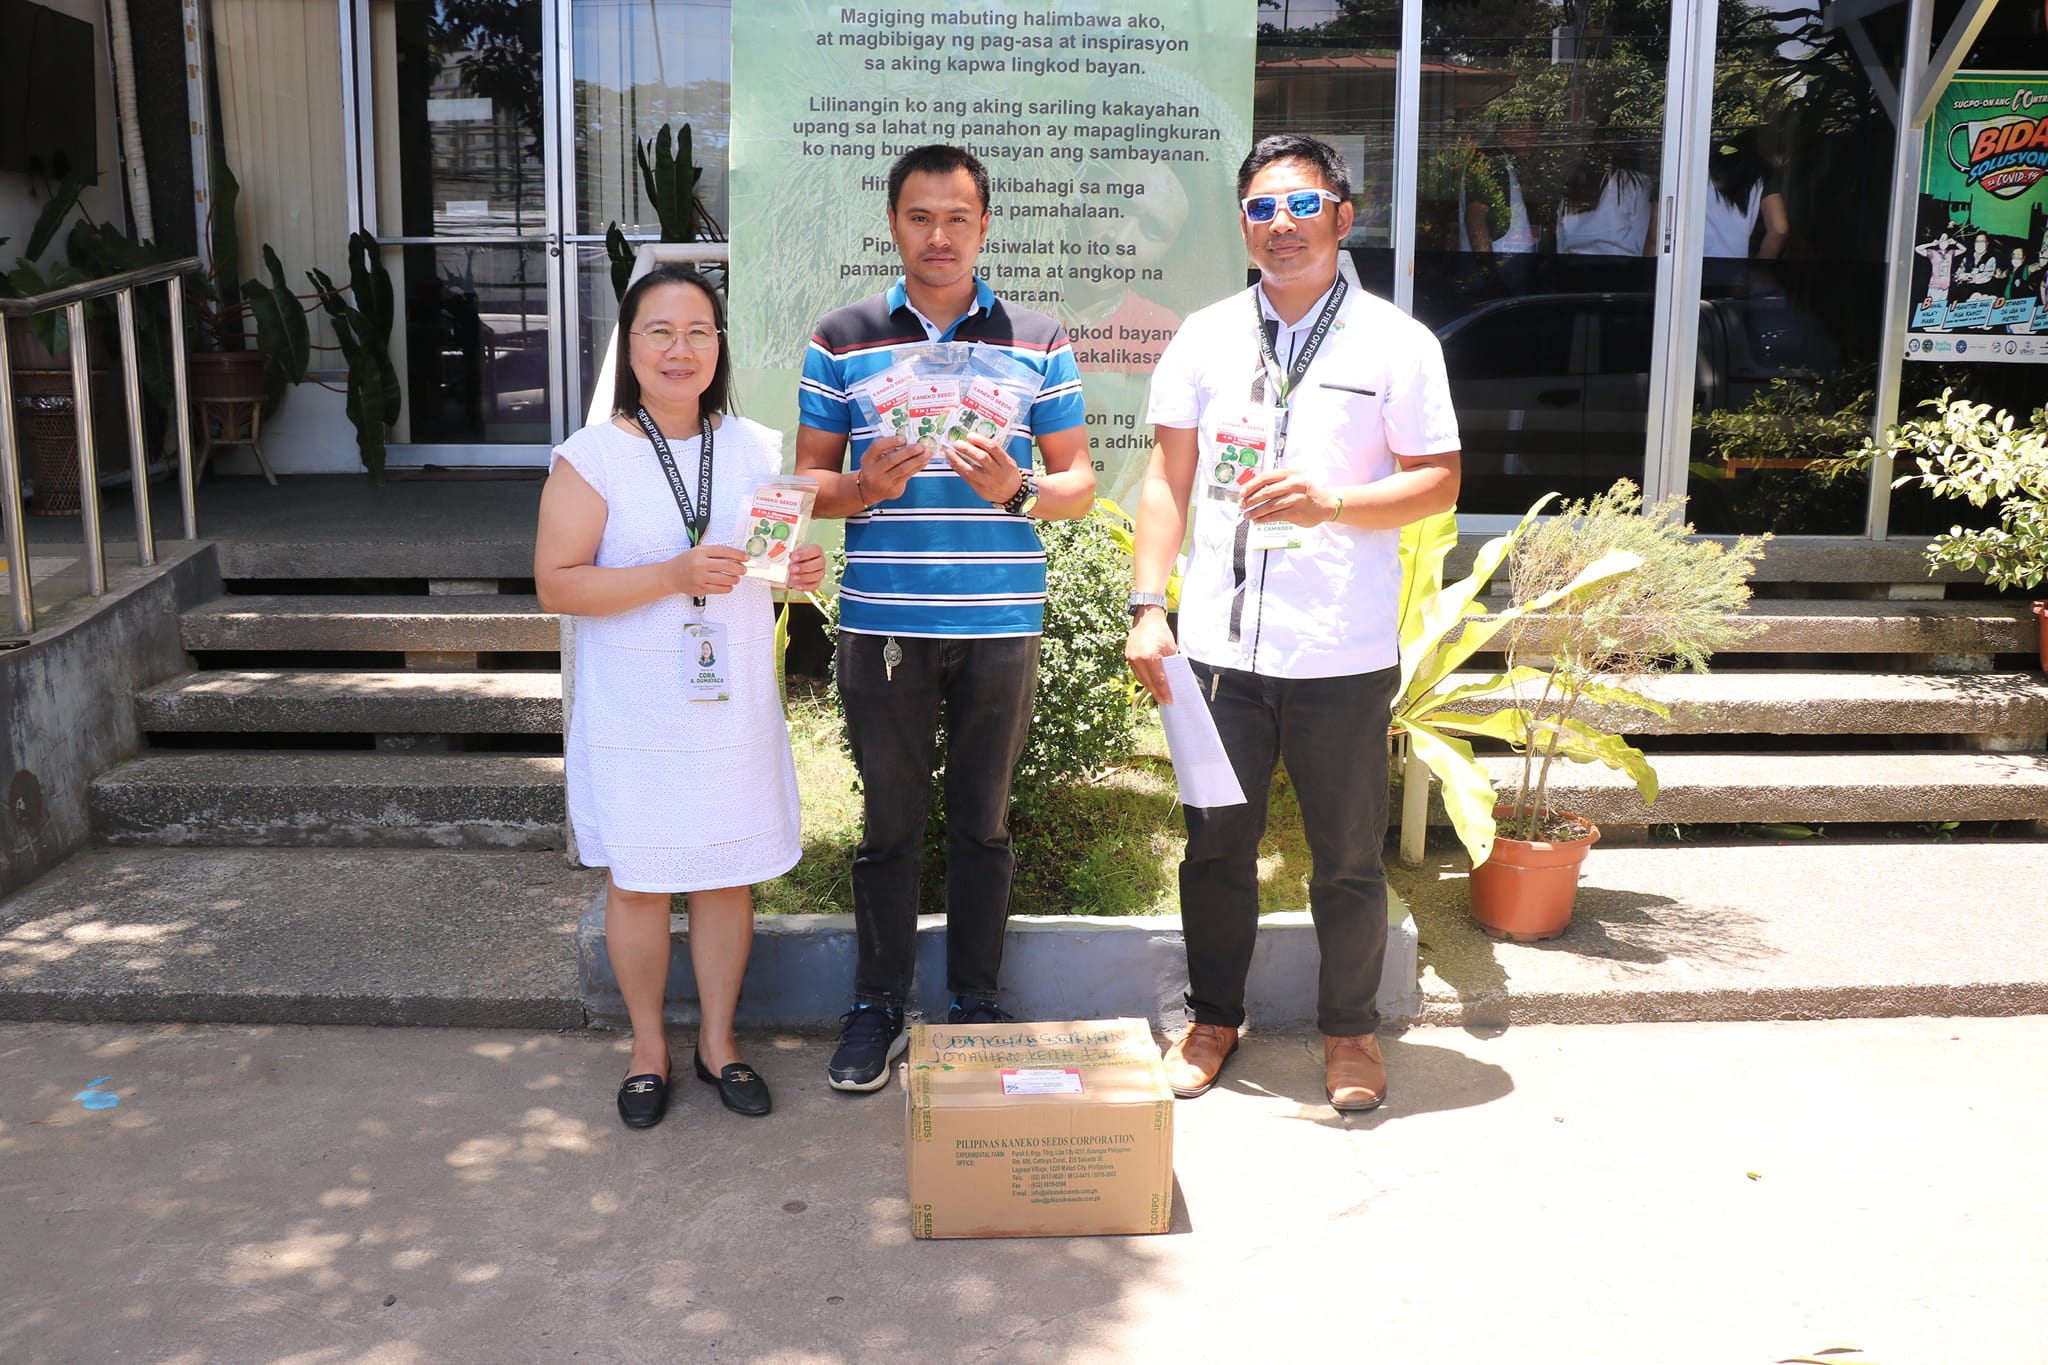 DA-10 supports small-scale gardening, food security efforts in Bukidnon